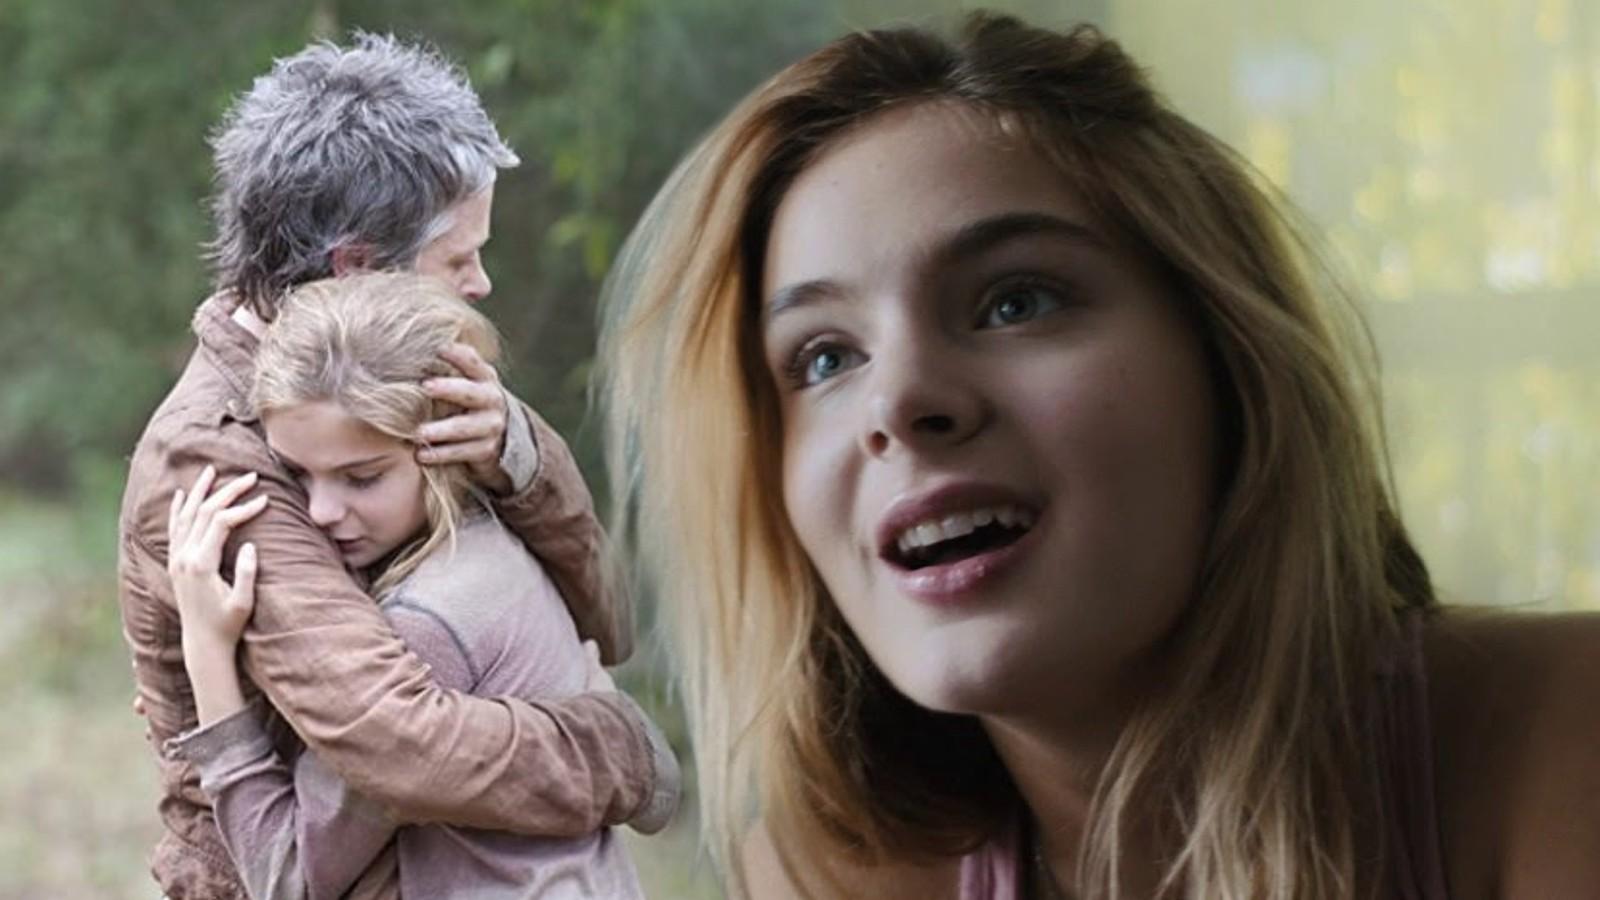 The "look at the flowers, Lizzie" moment in The Walking Dead and Brighton Sharbino in Bitch